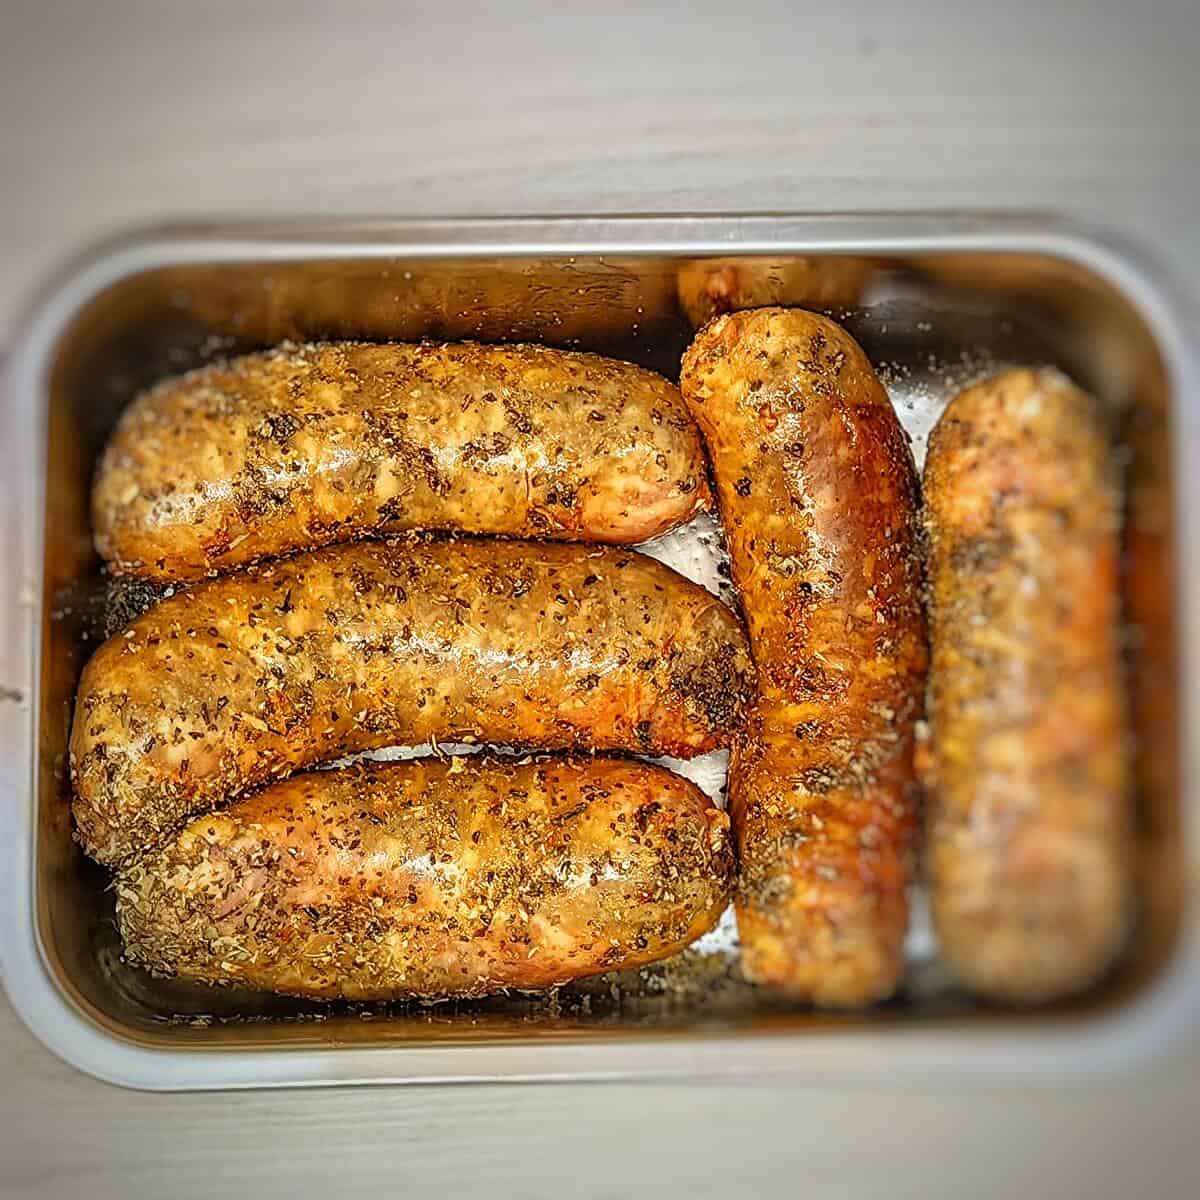 coat italian sausage with oil and seasoning